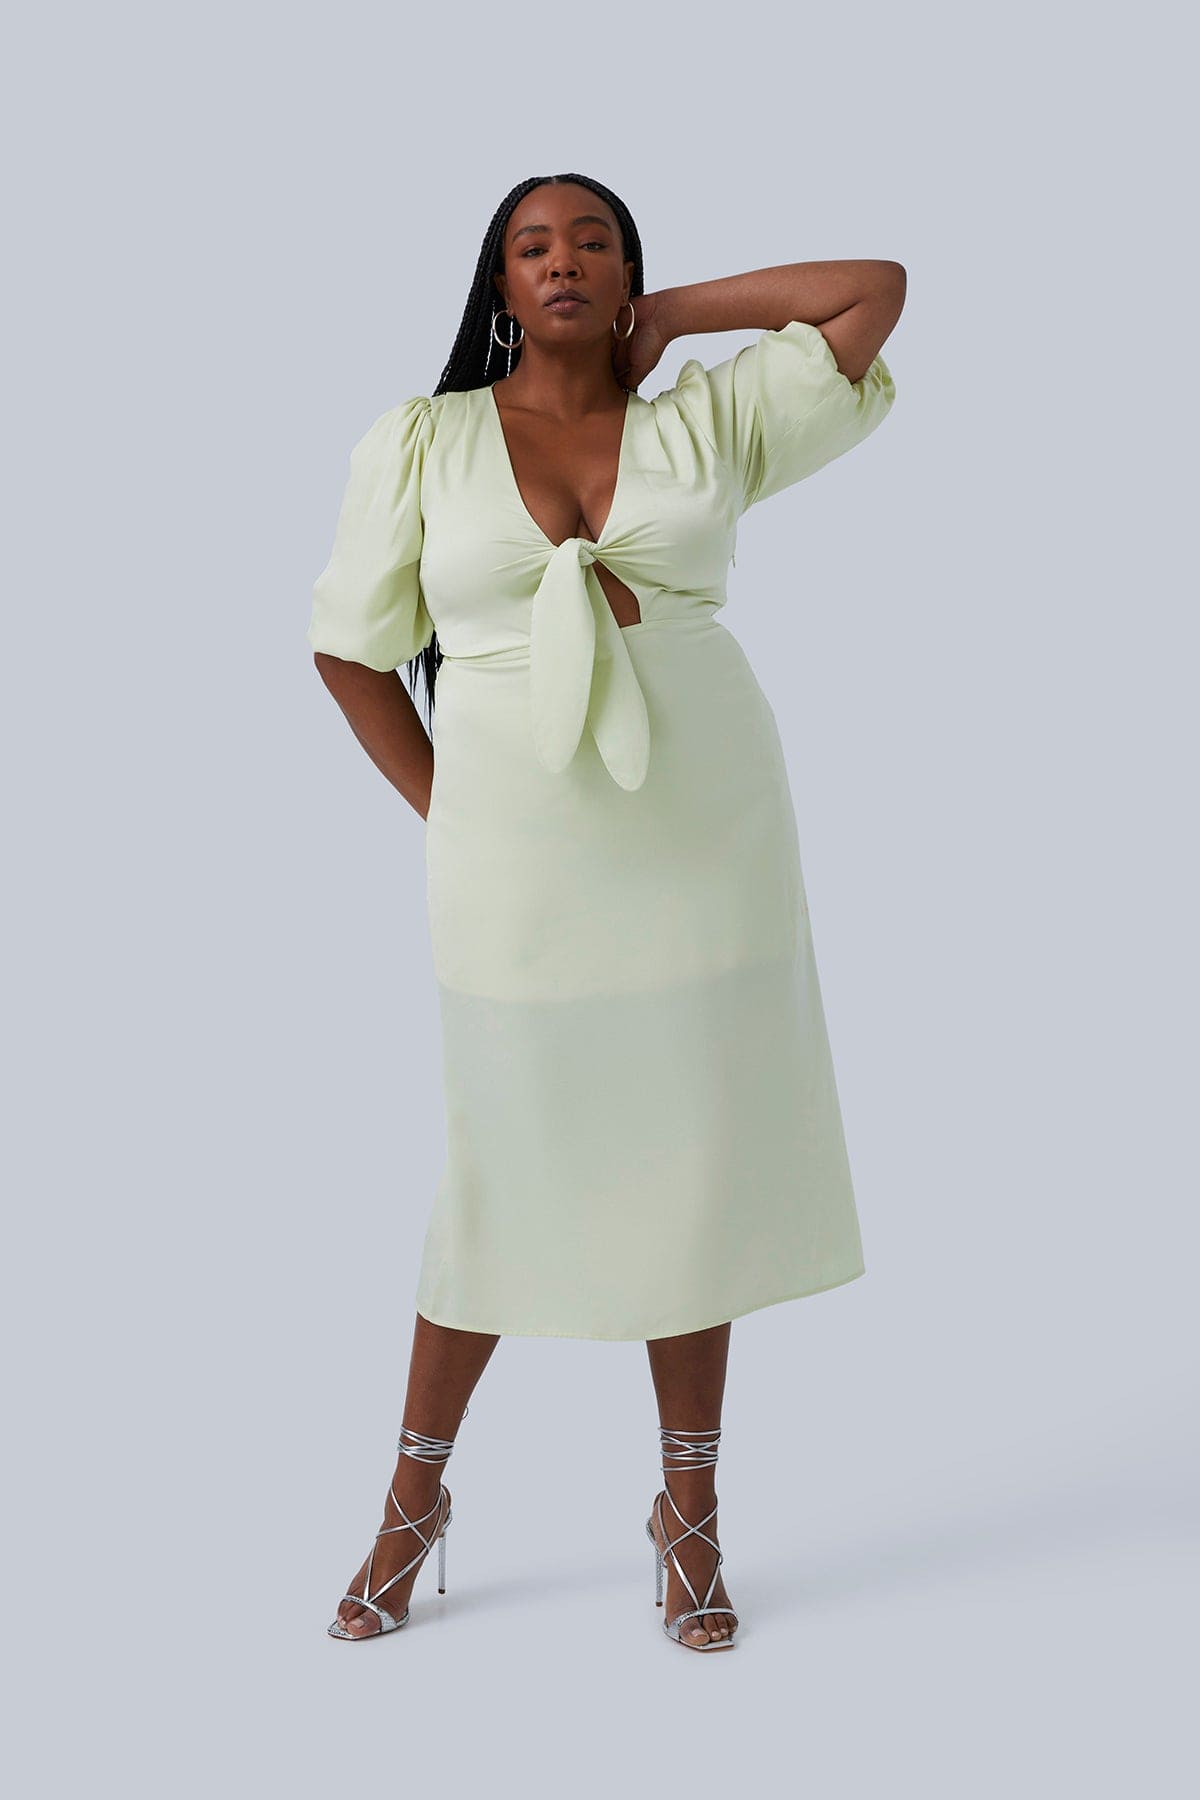 Front view of the Allie Maxi dress for plus size women size 14. Model has one arm on her neck and the other arm behind her back. Dress has tie in the front and can be worn without a bra.